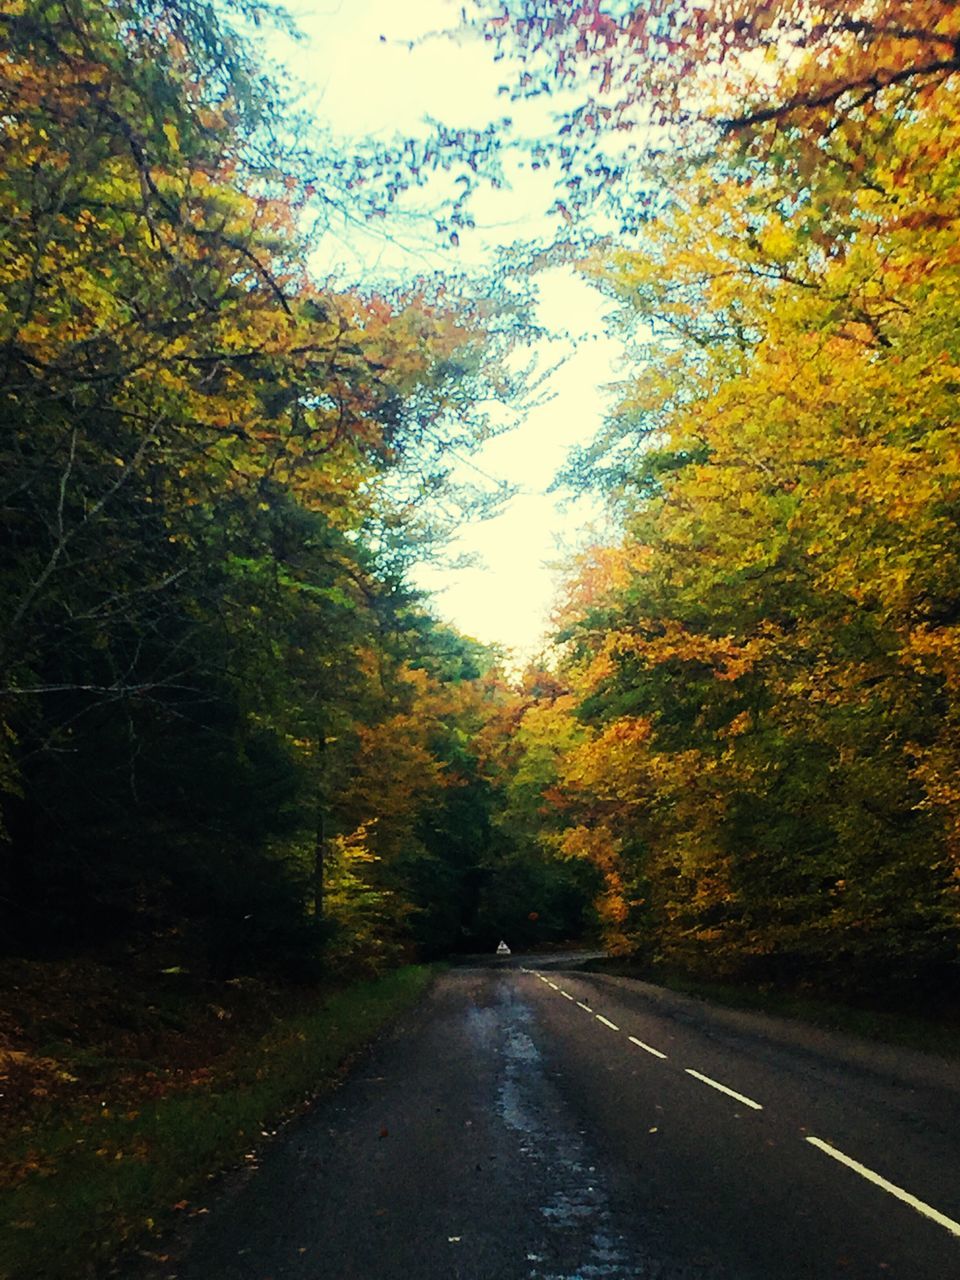 autumn, tree, nature, change, tranquility, tranquil scene, scenics, road, the way forward, no people, outdoors, beauty in nature, day, leaf, forest, growth, sky, landscape